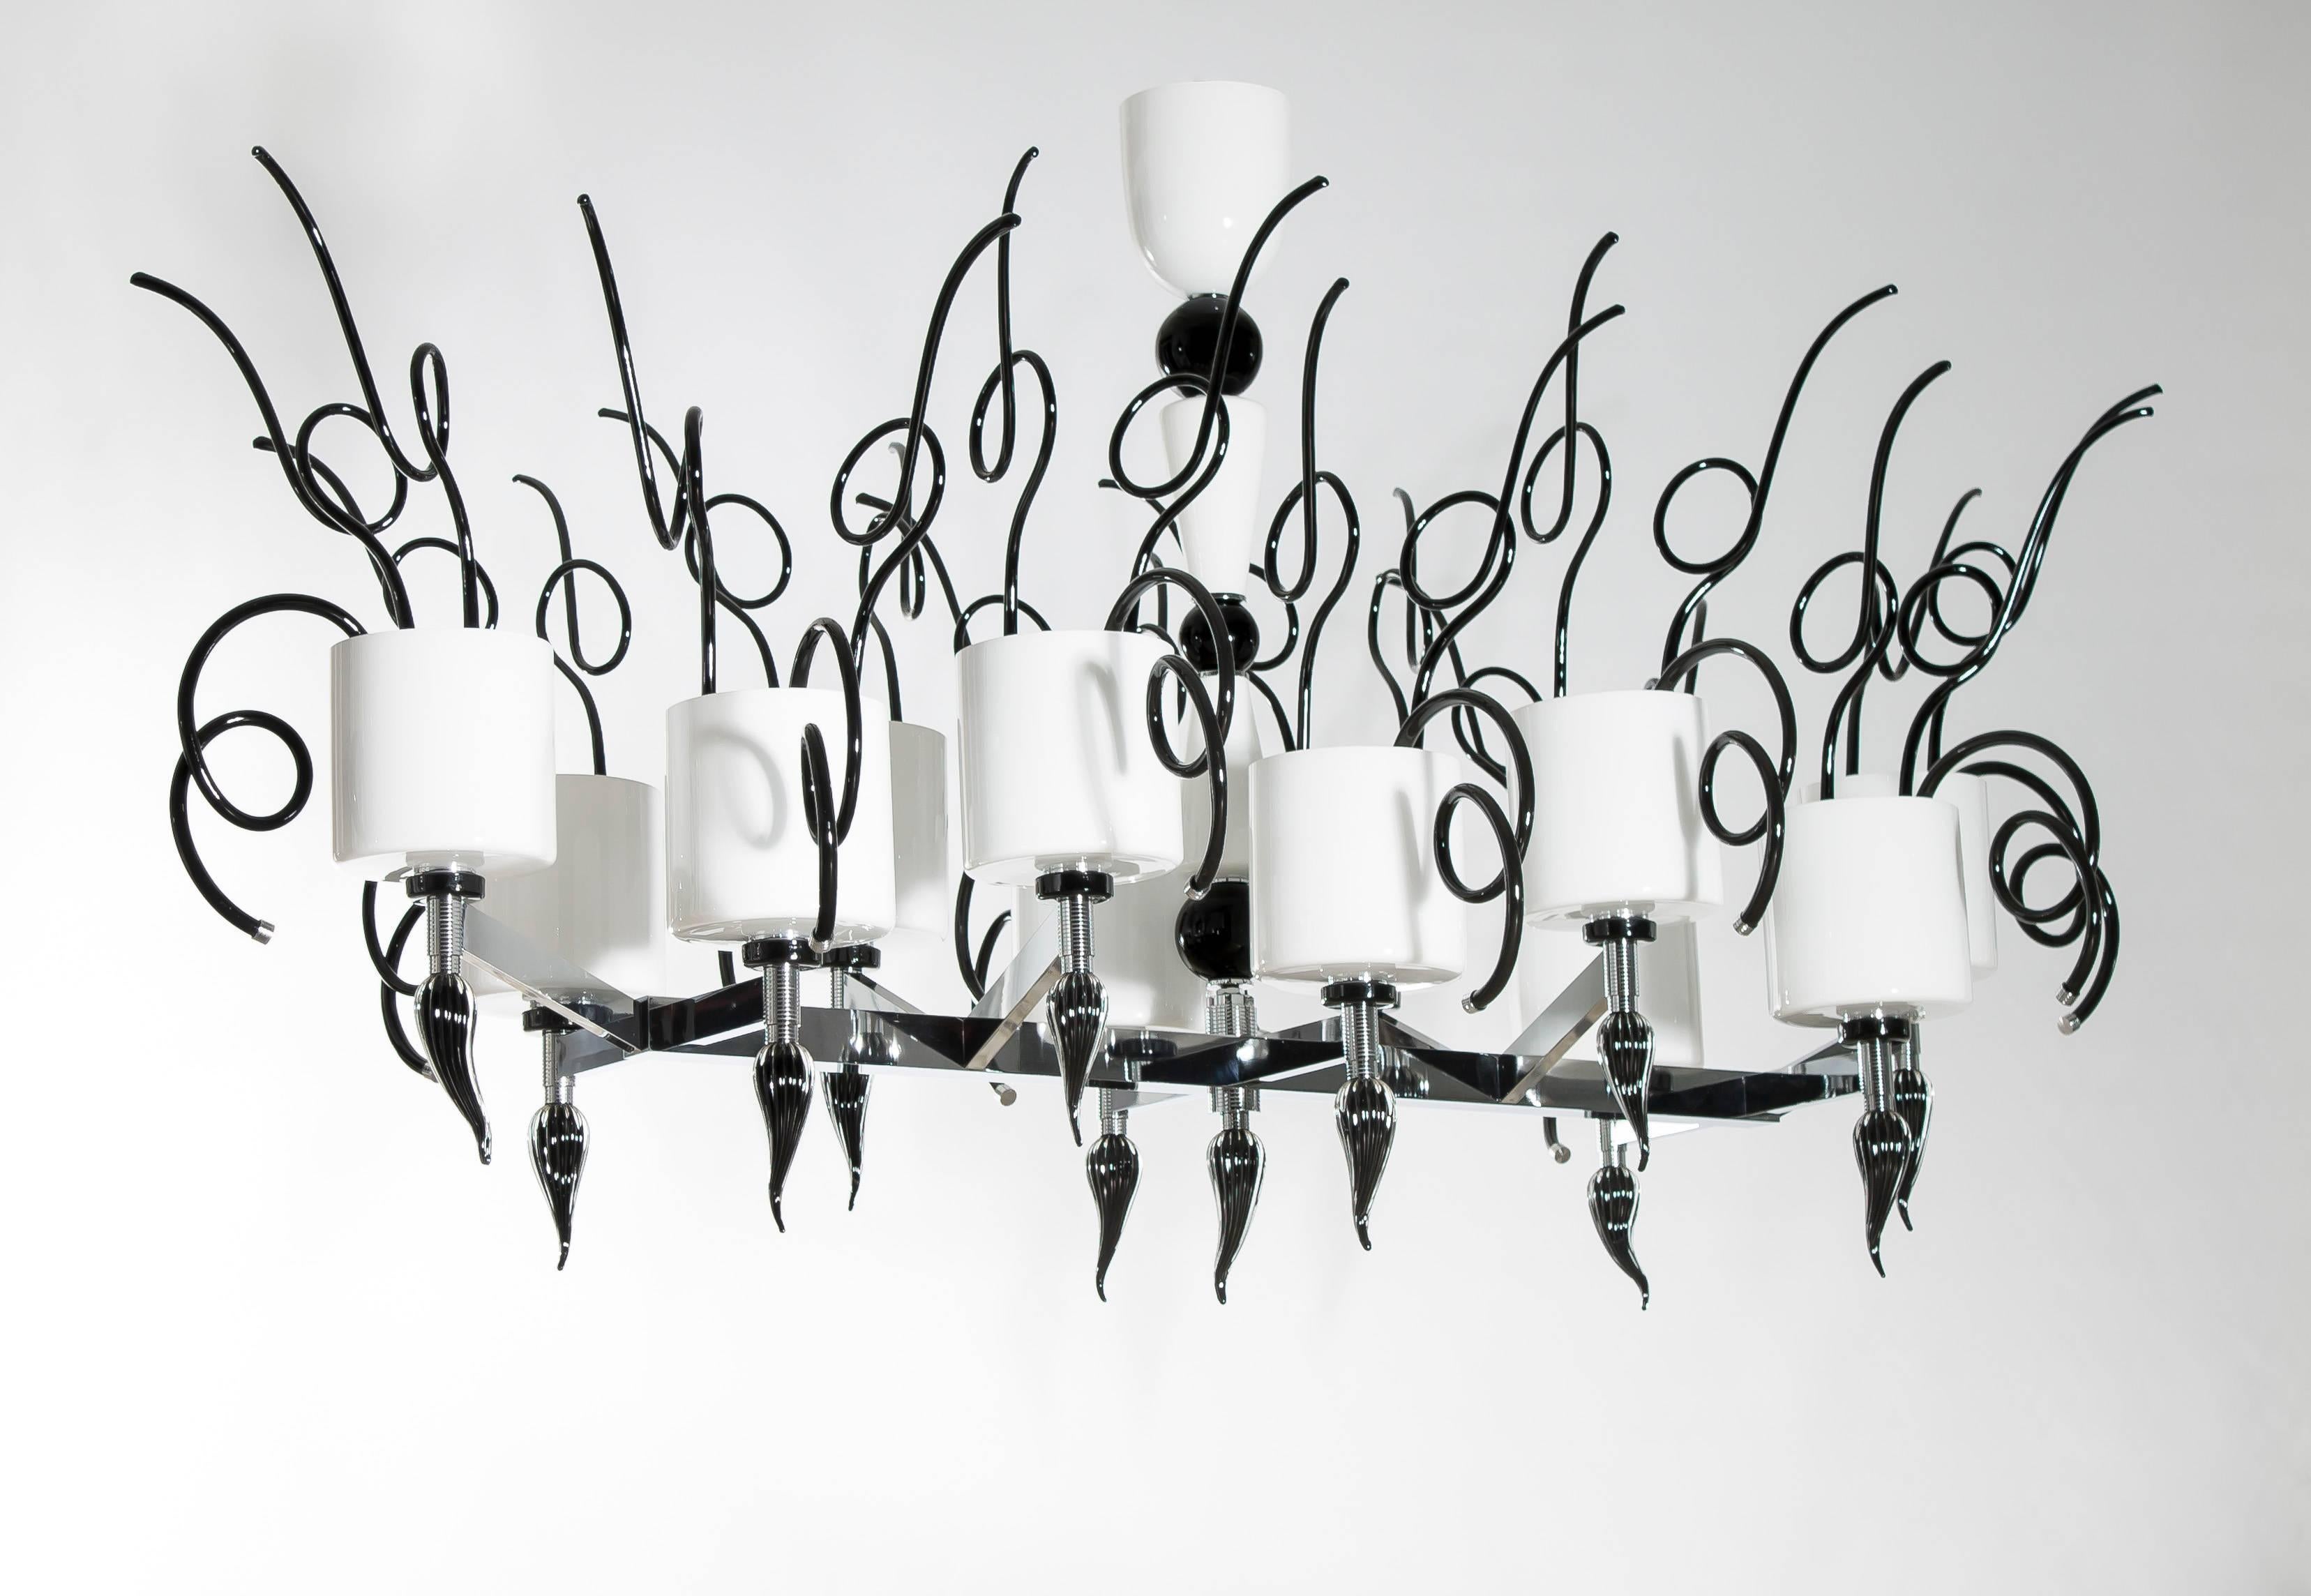 Curly Chandelier black and white in blown Murano Glass contemporary Italy
The chandelier is composed by a fantastic chromed framework, where twelve arms  are disposed in different heights generating a gorgeous artwork. Each arm supports a